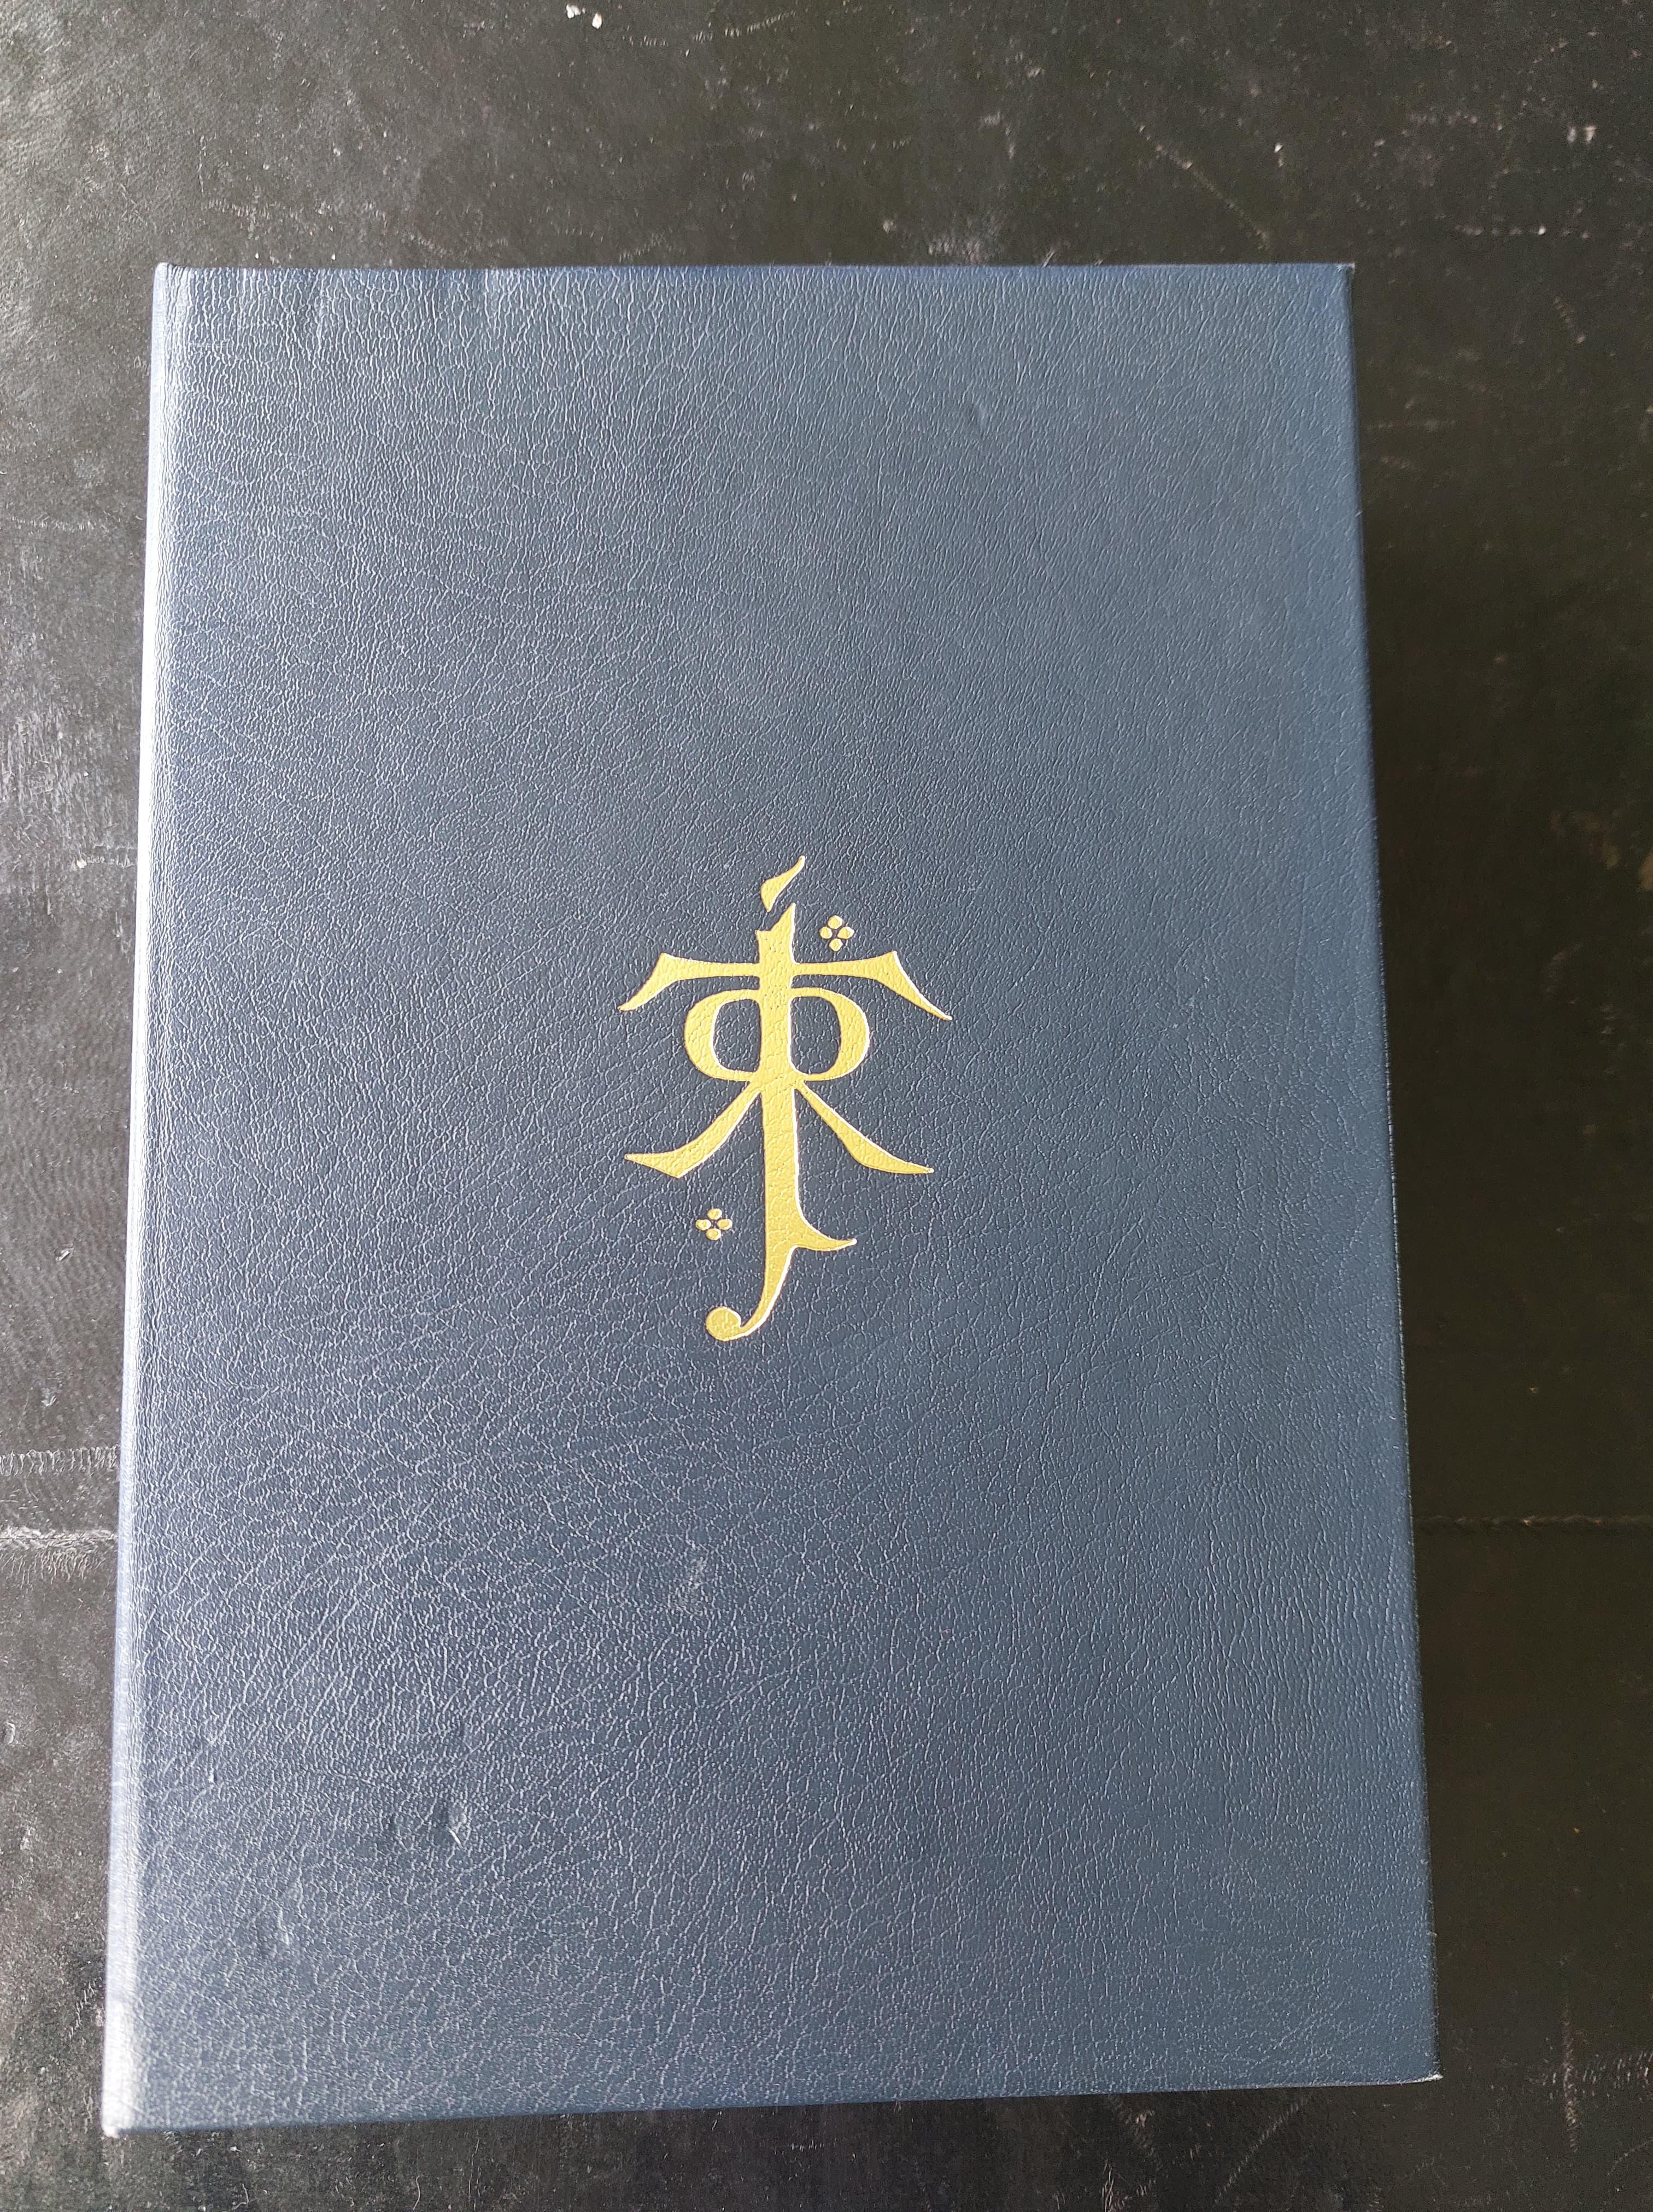 
The Children of Hurin, Signed Limited Numbered Super Deluxe Edition 3